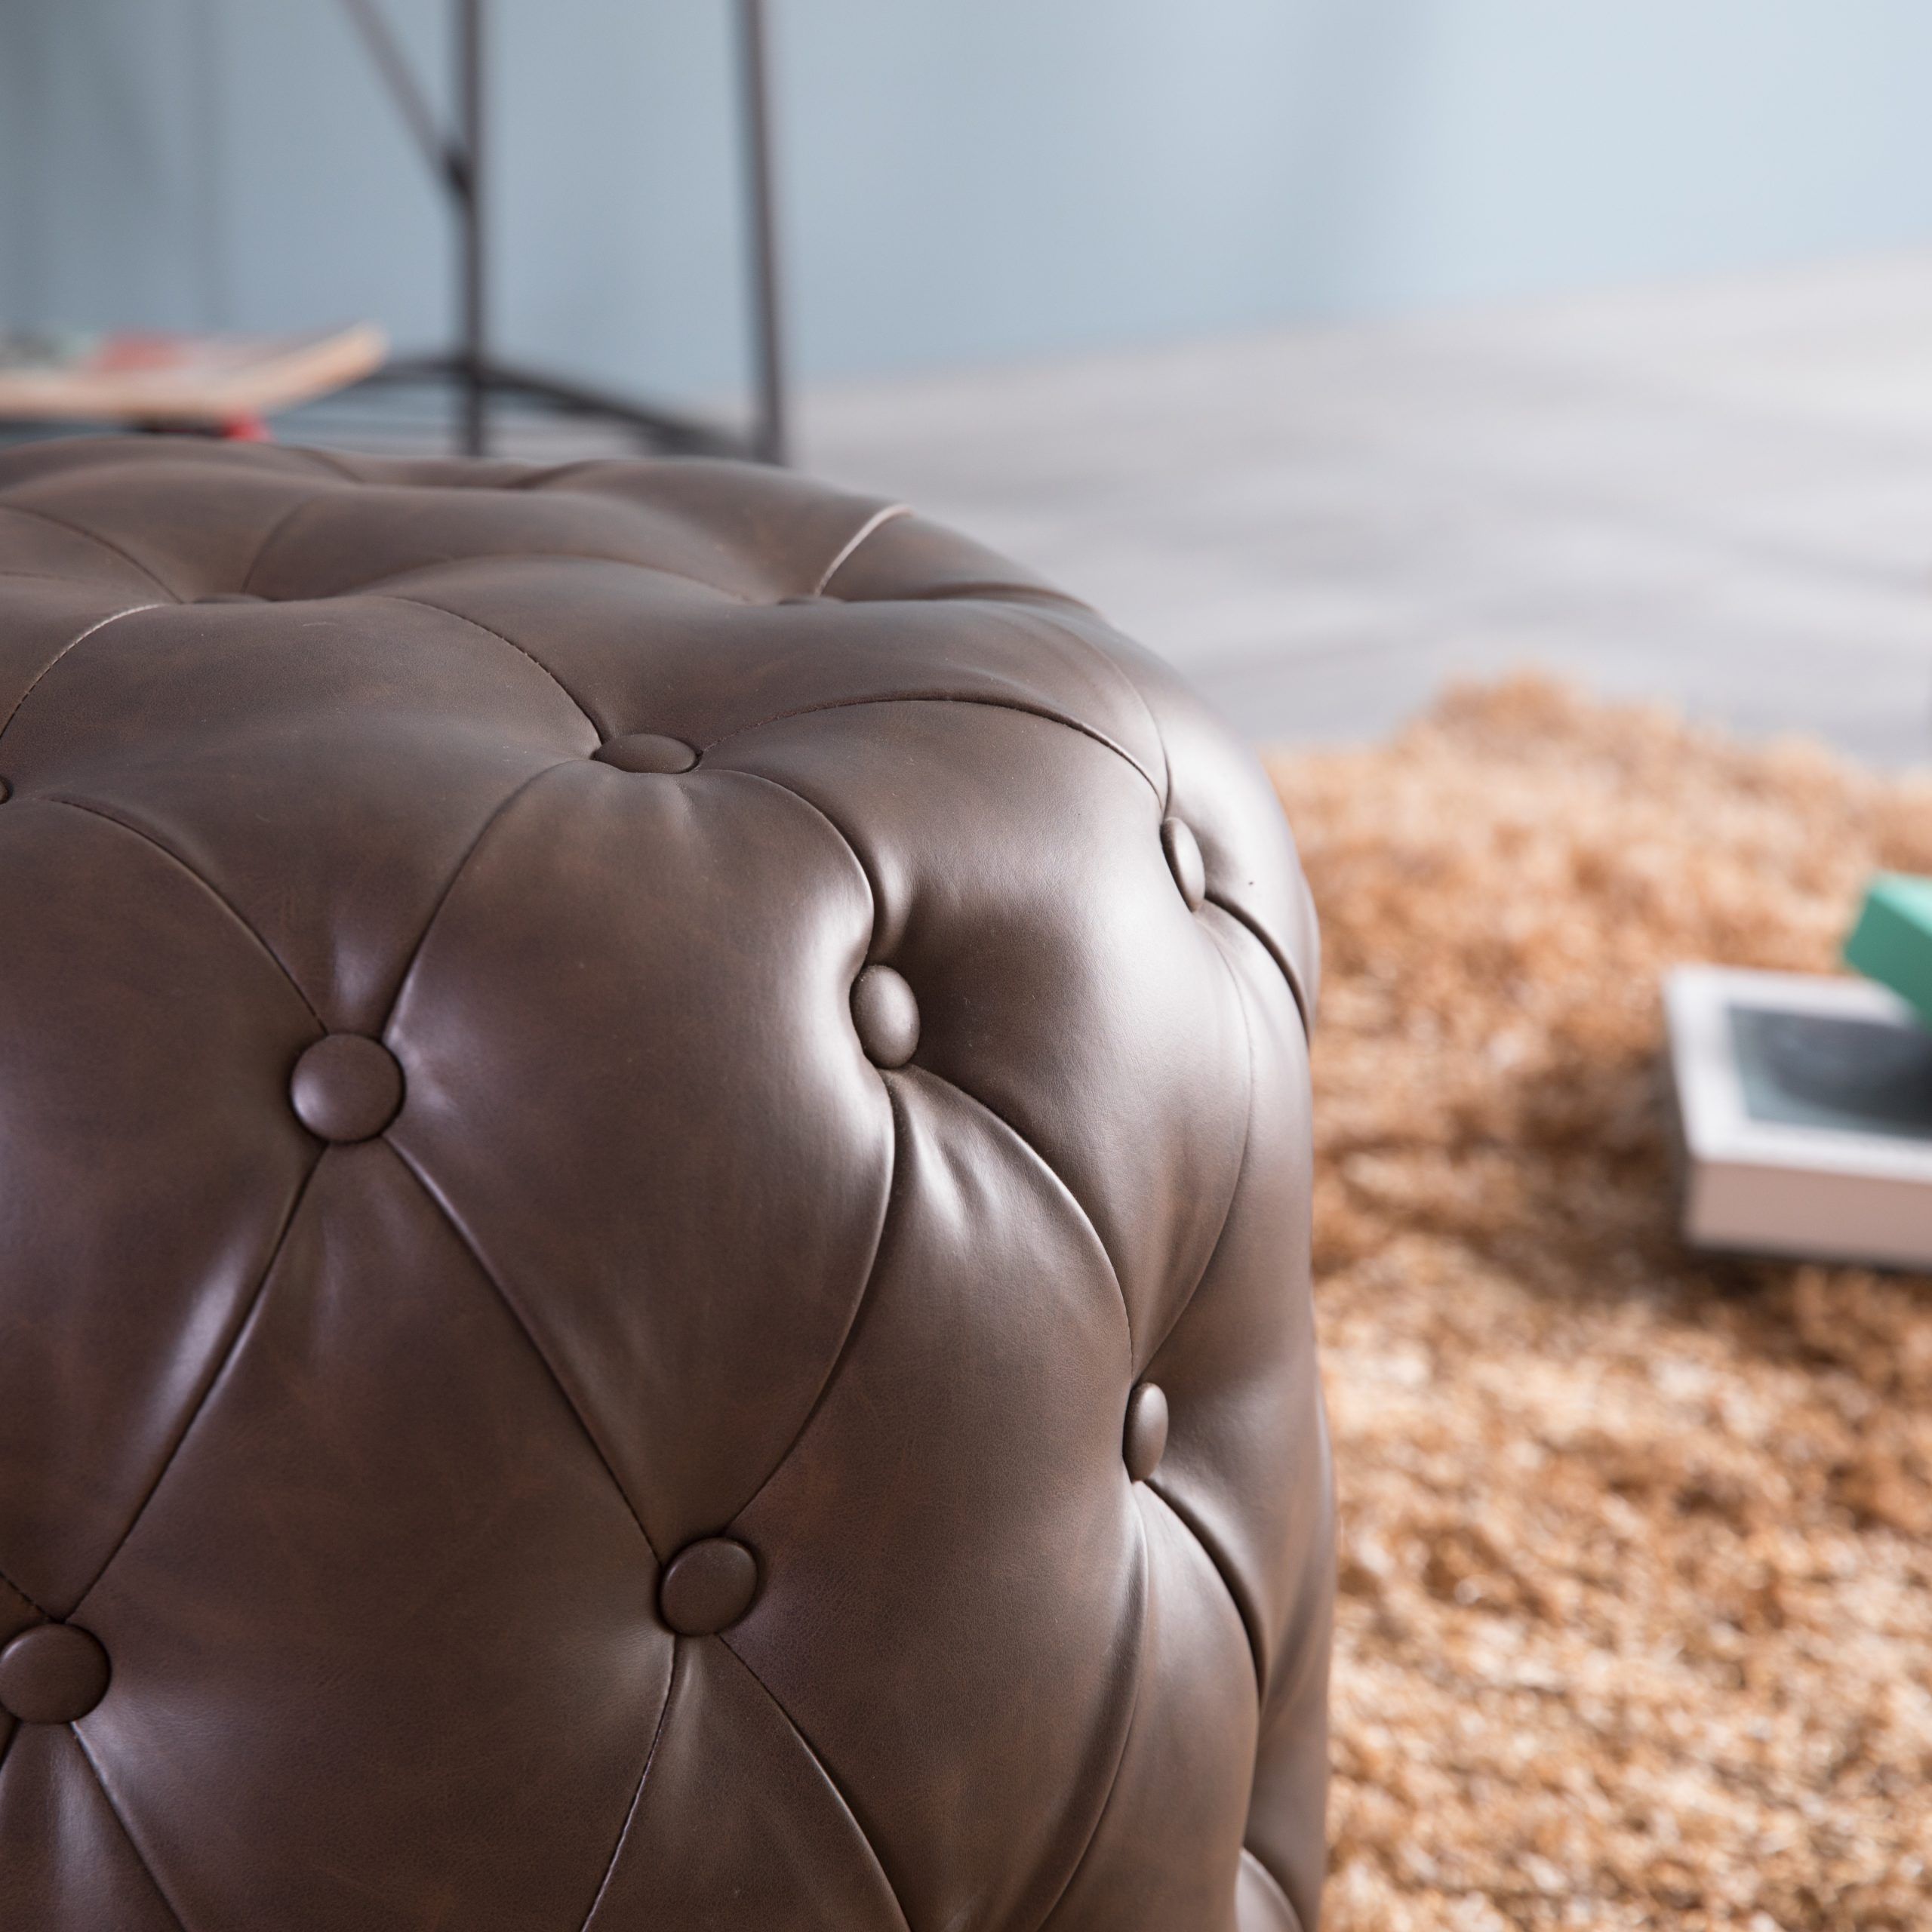 New Bold Tones Tufted Modern Leather Round Ottoman Stool, Brown (View 7 of 10)